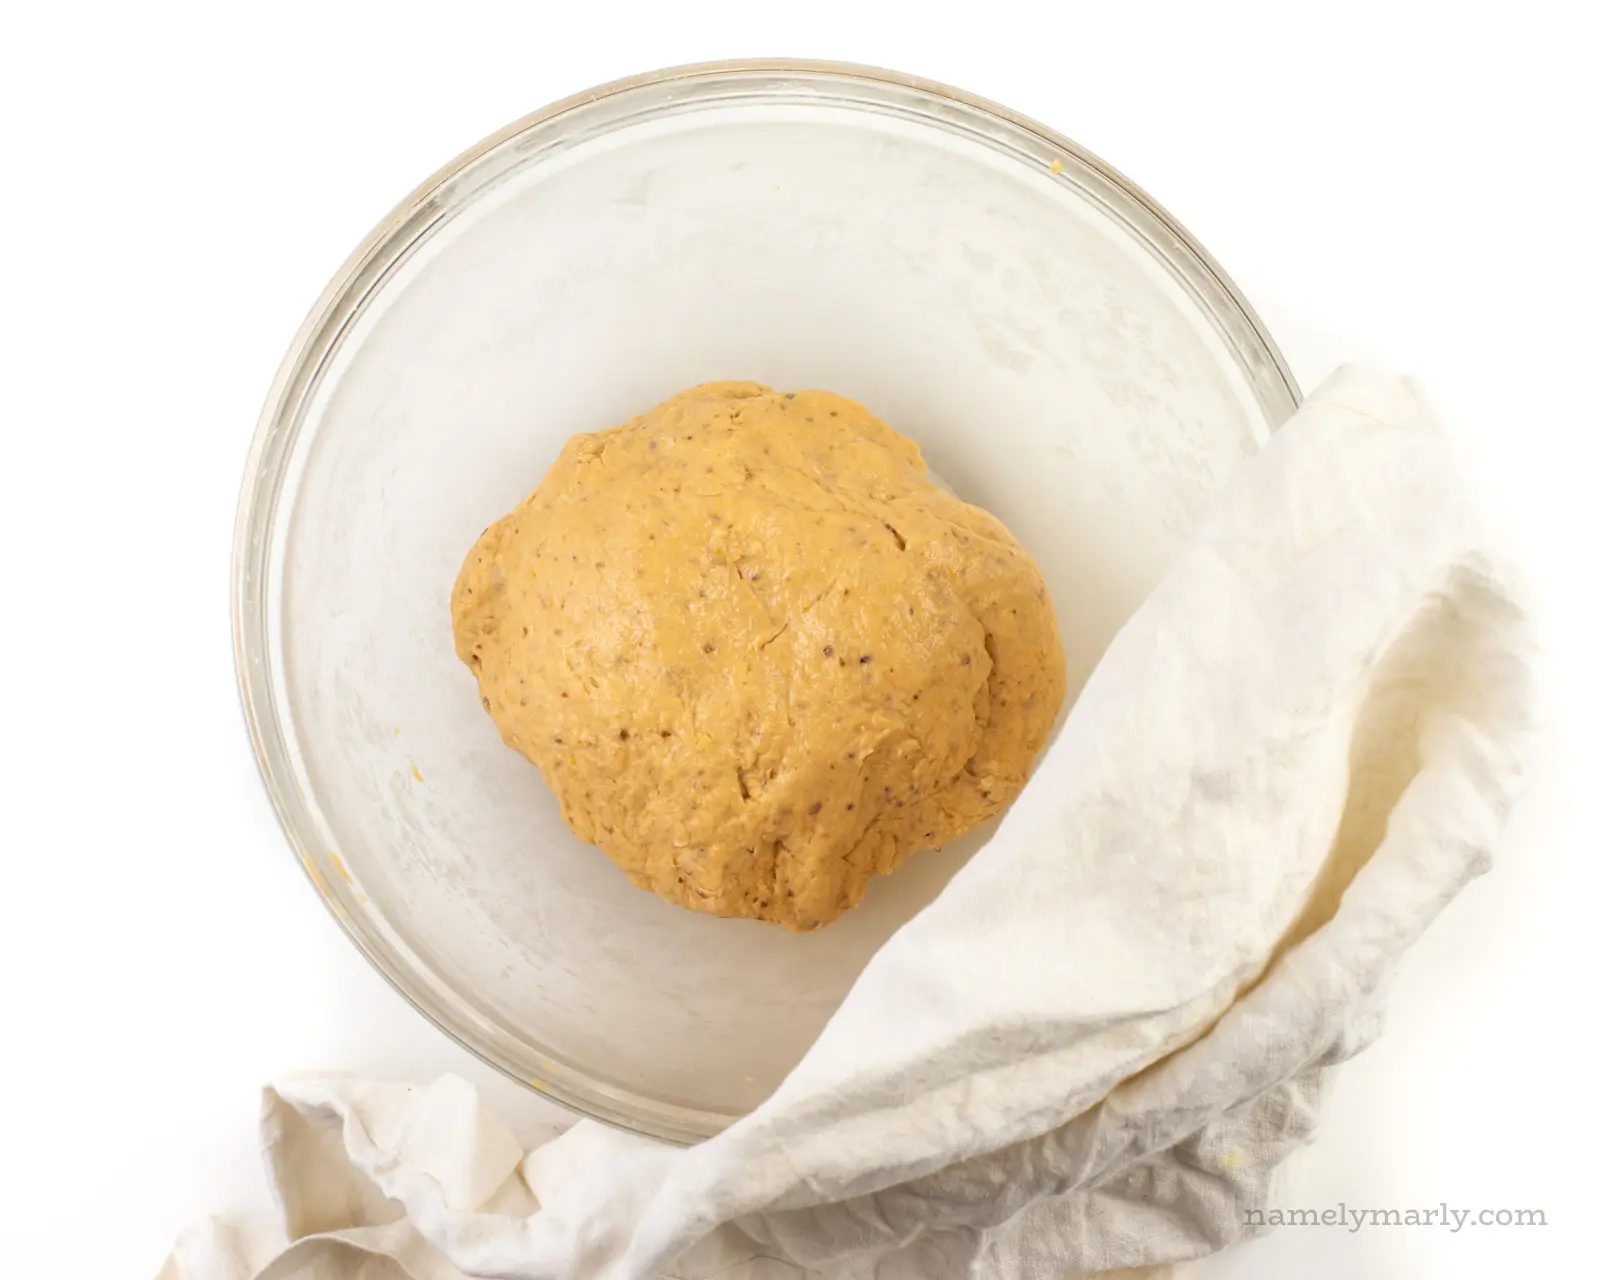 A ball of sweet potato dough is in a glass bowl with a kitchen towel beside it.